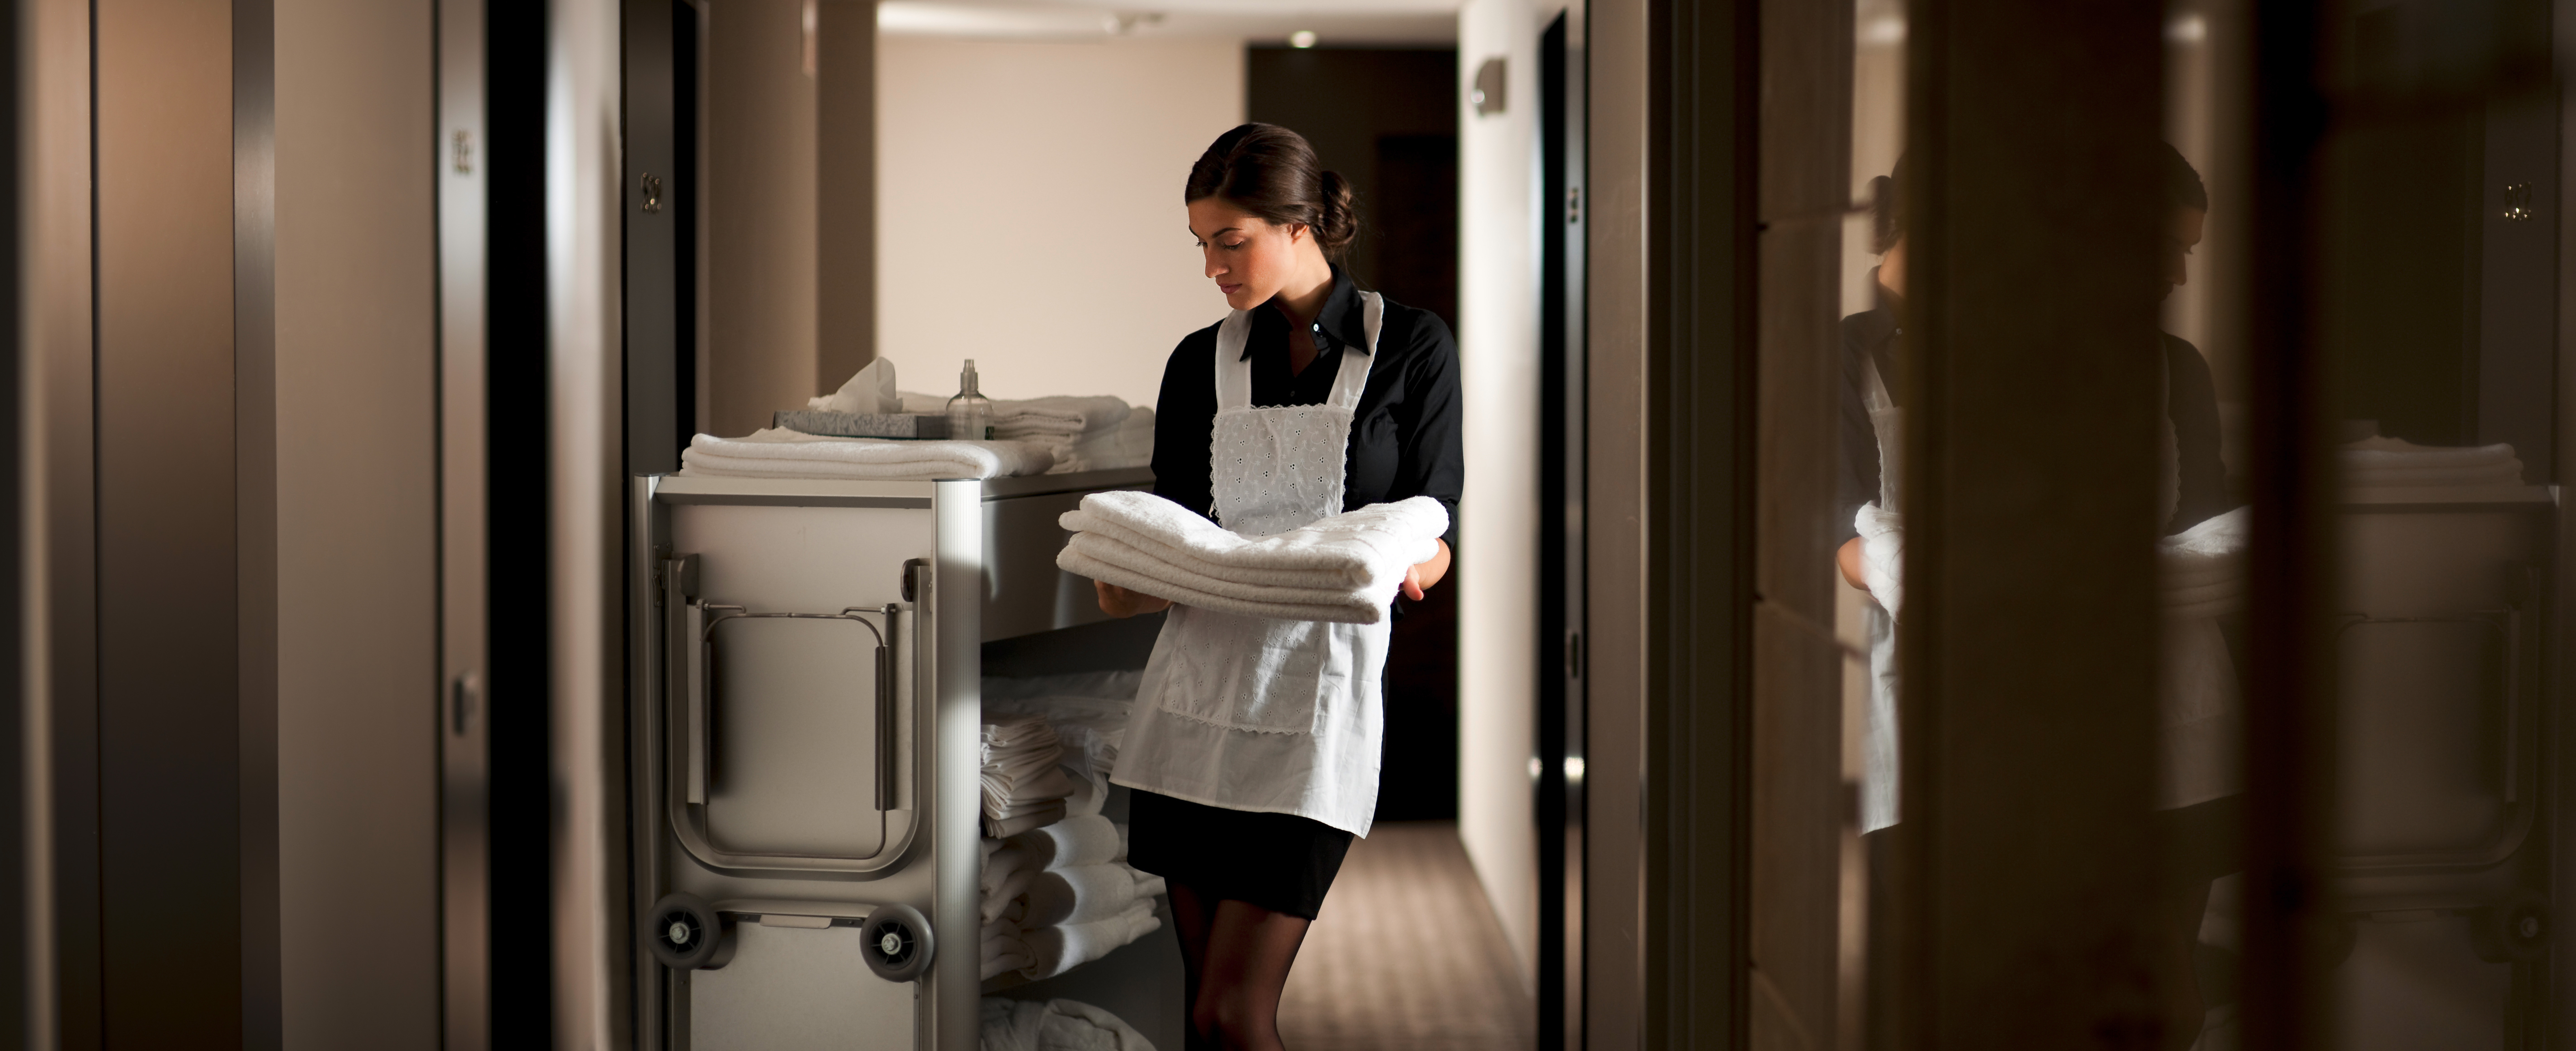 Working in the hospitality industry? UniMac is your best OPL laundry partner